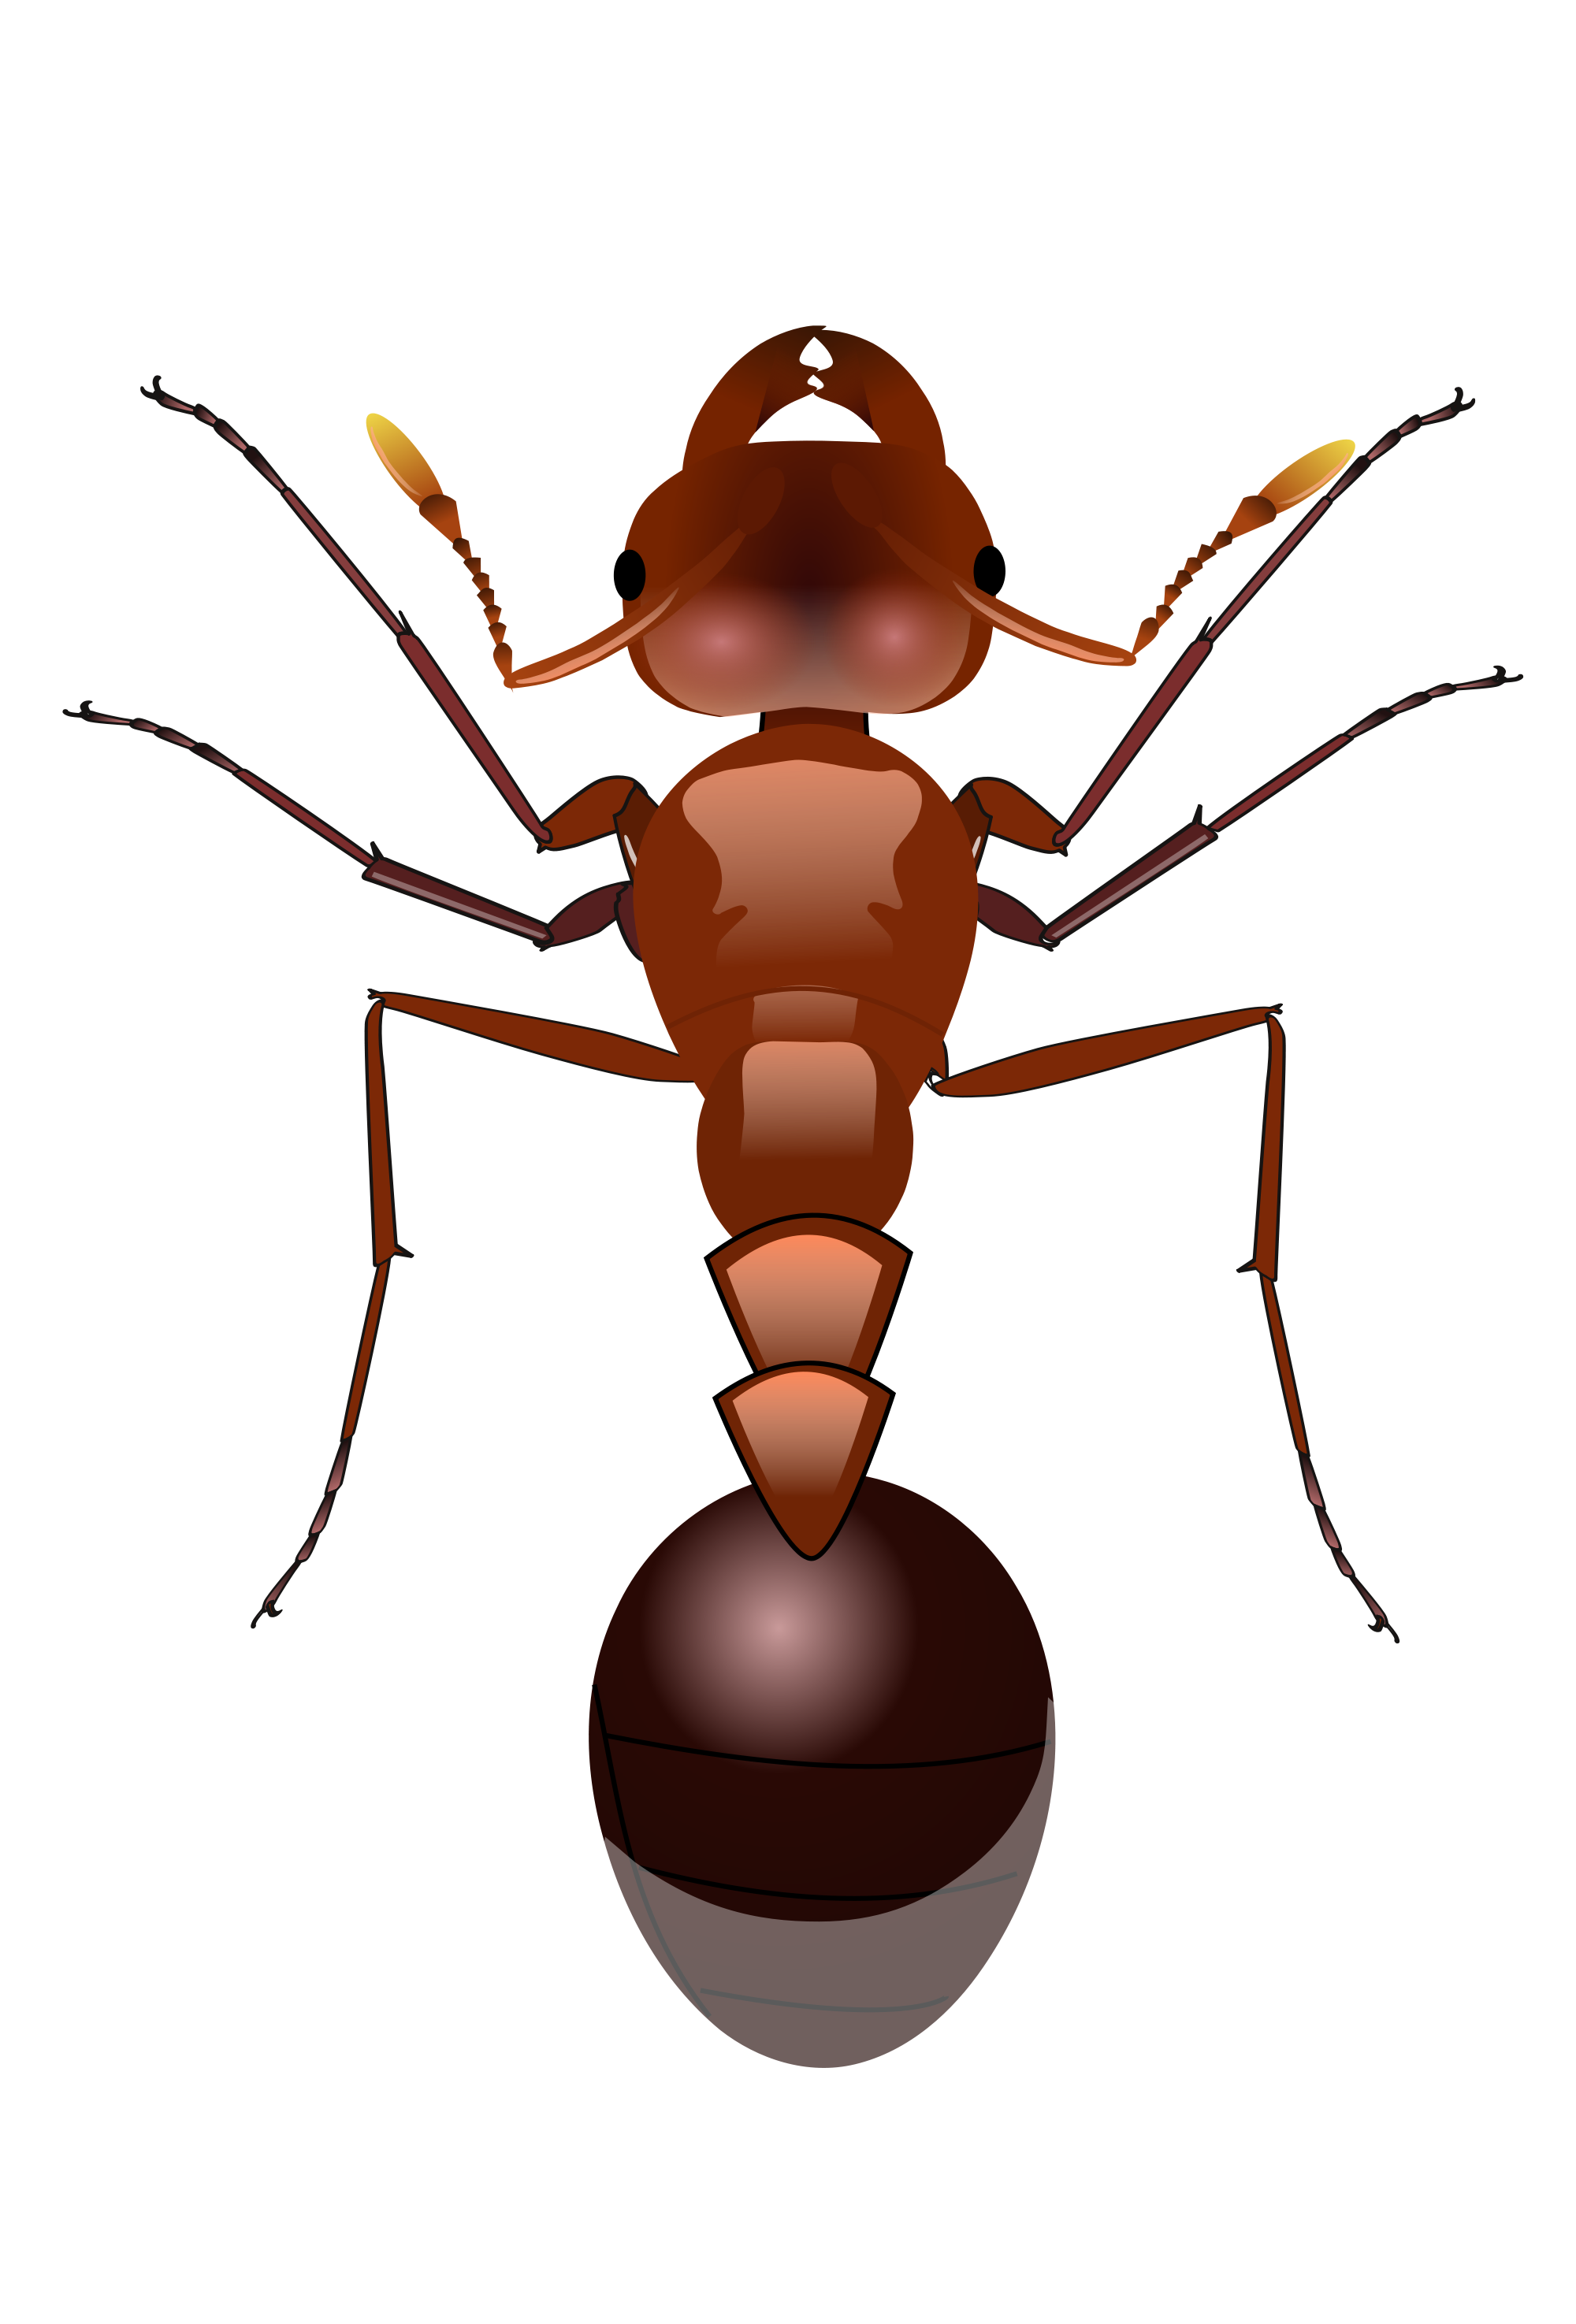 Ant Vector Pic HQ Image Free PNG Image